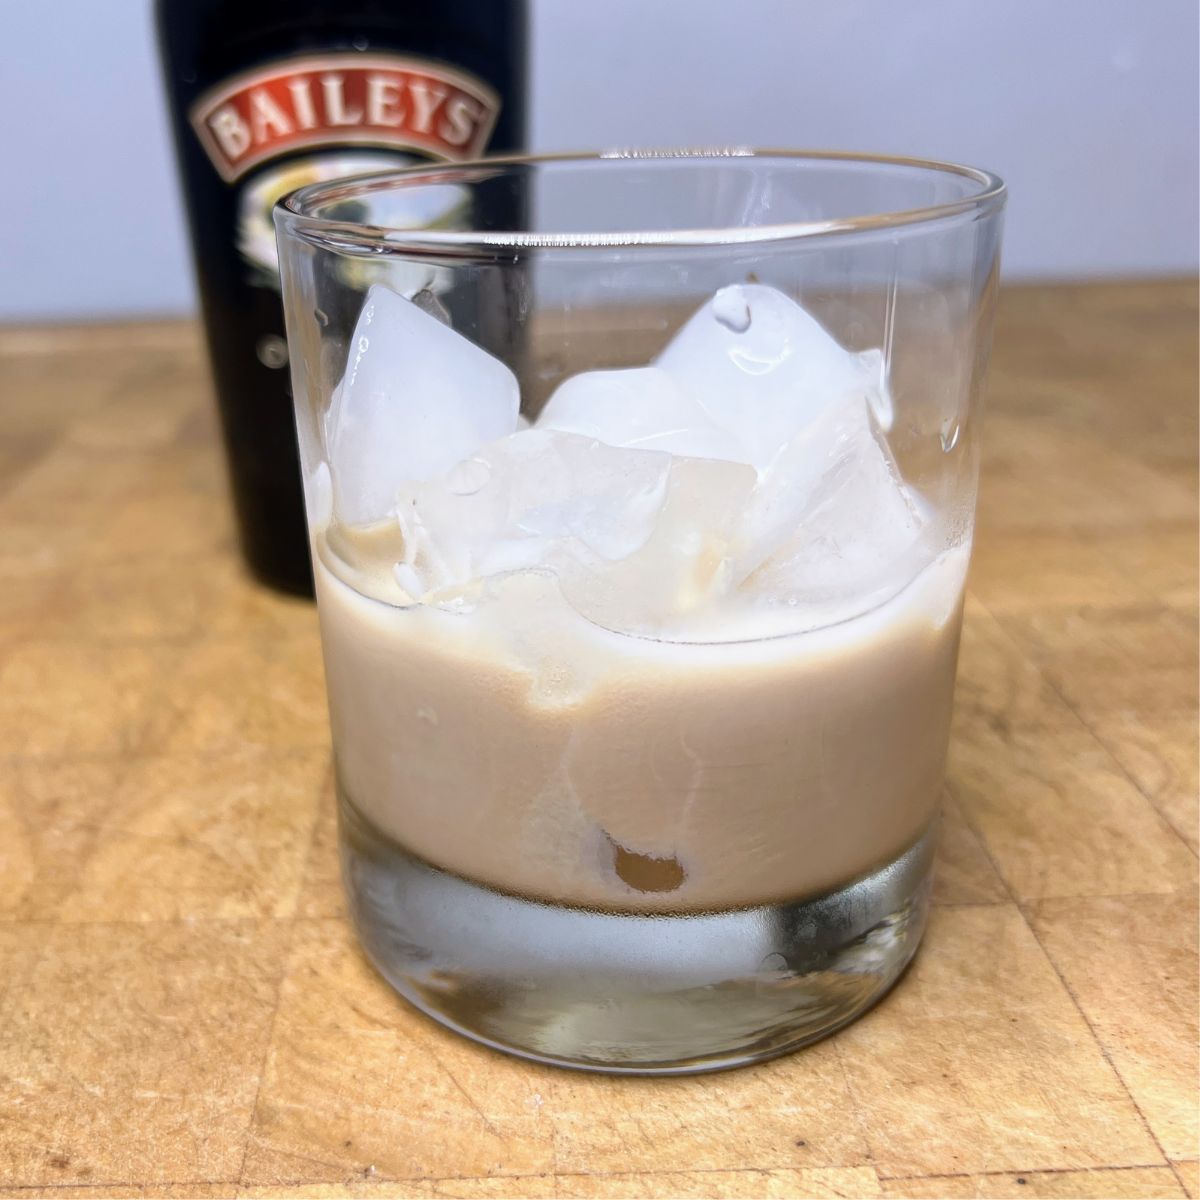 Bailey's on the rocks in a glass on a wooden table with a bottle of baileys in the background.